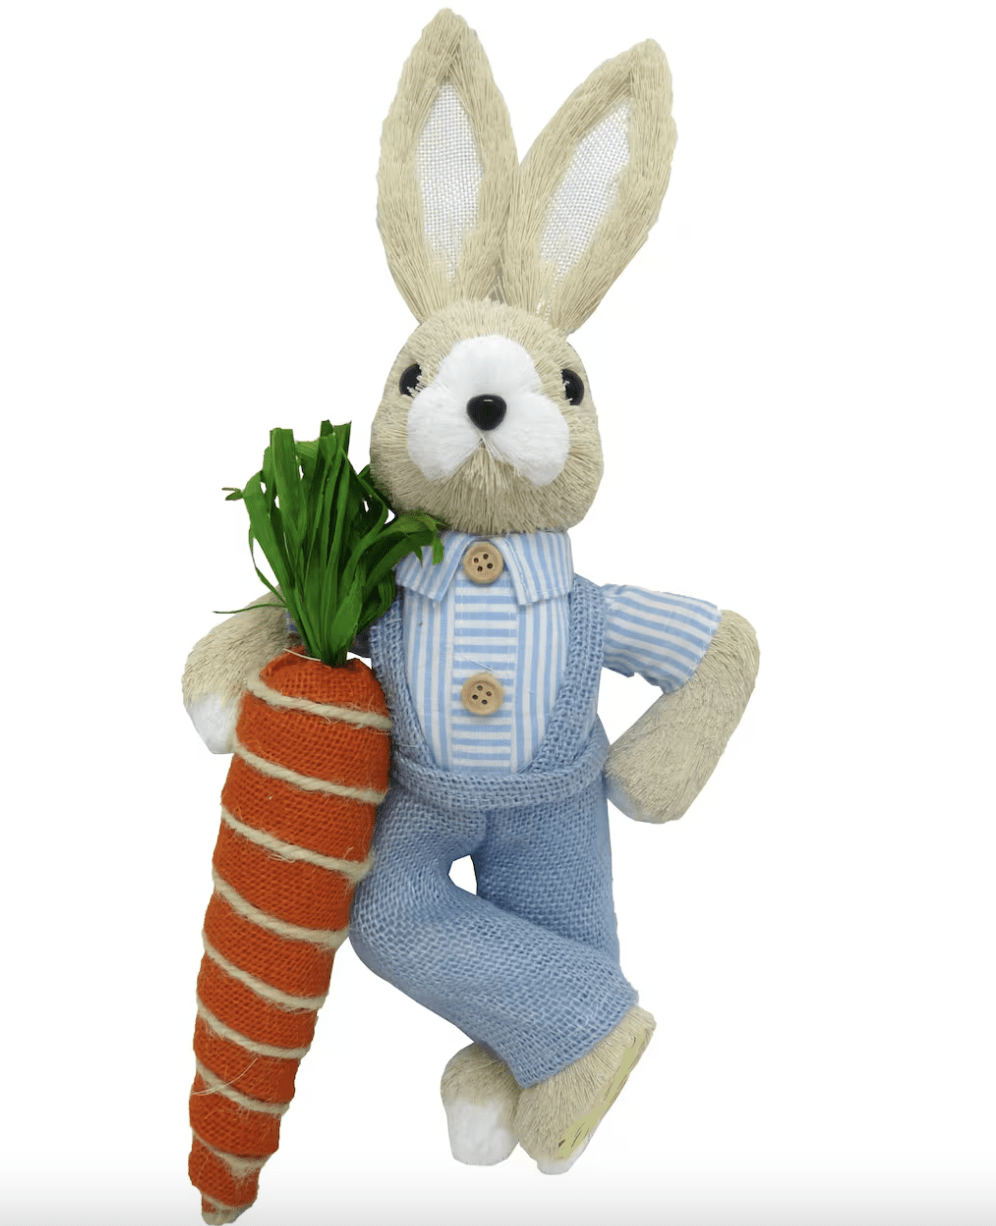 sisal bunny wearing blue overalls leaning on carrot